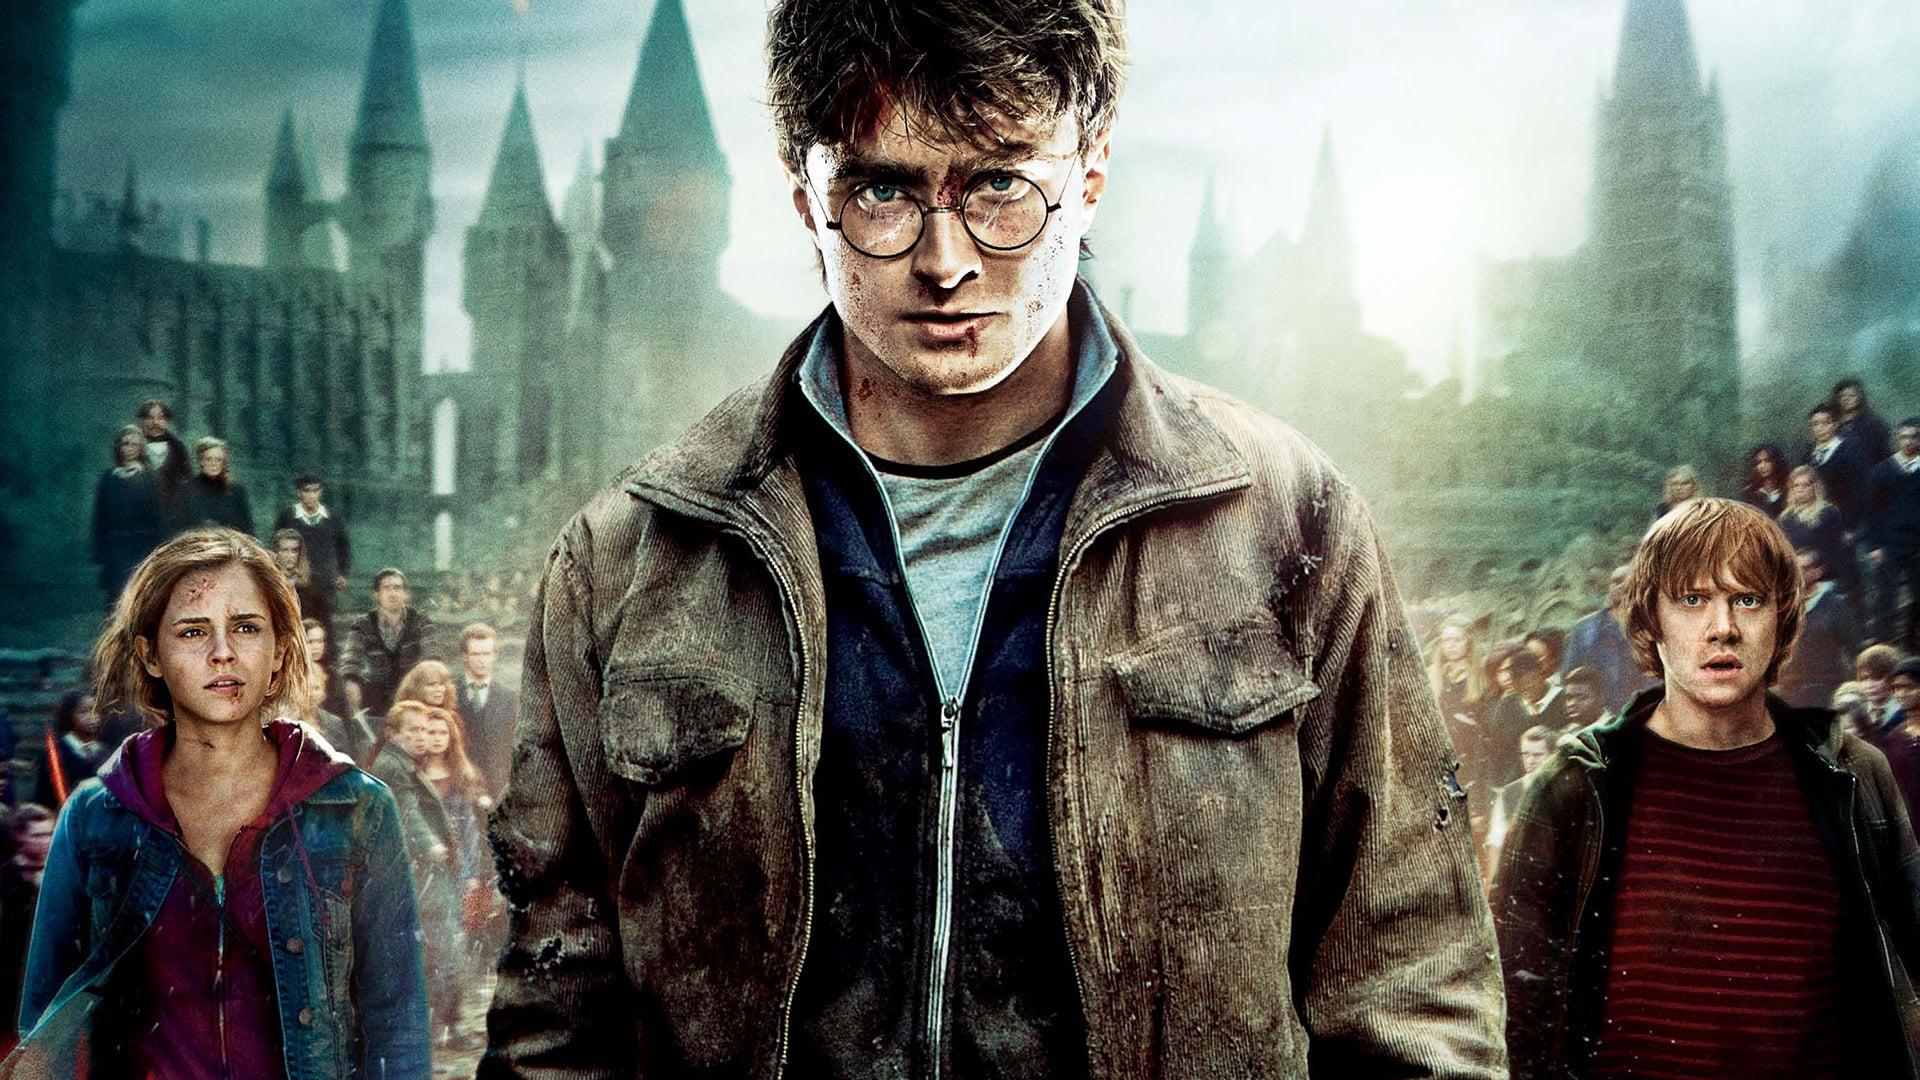 Backdrop Image for Harry Potter and the Deathly Hallows: Part 2